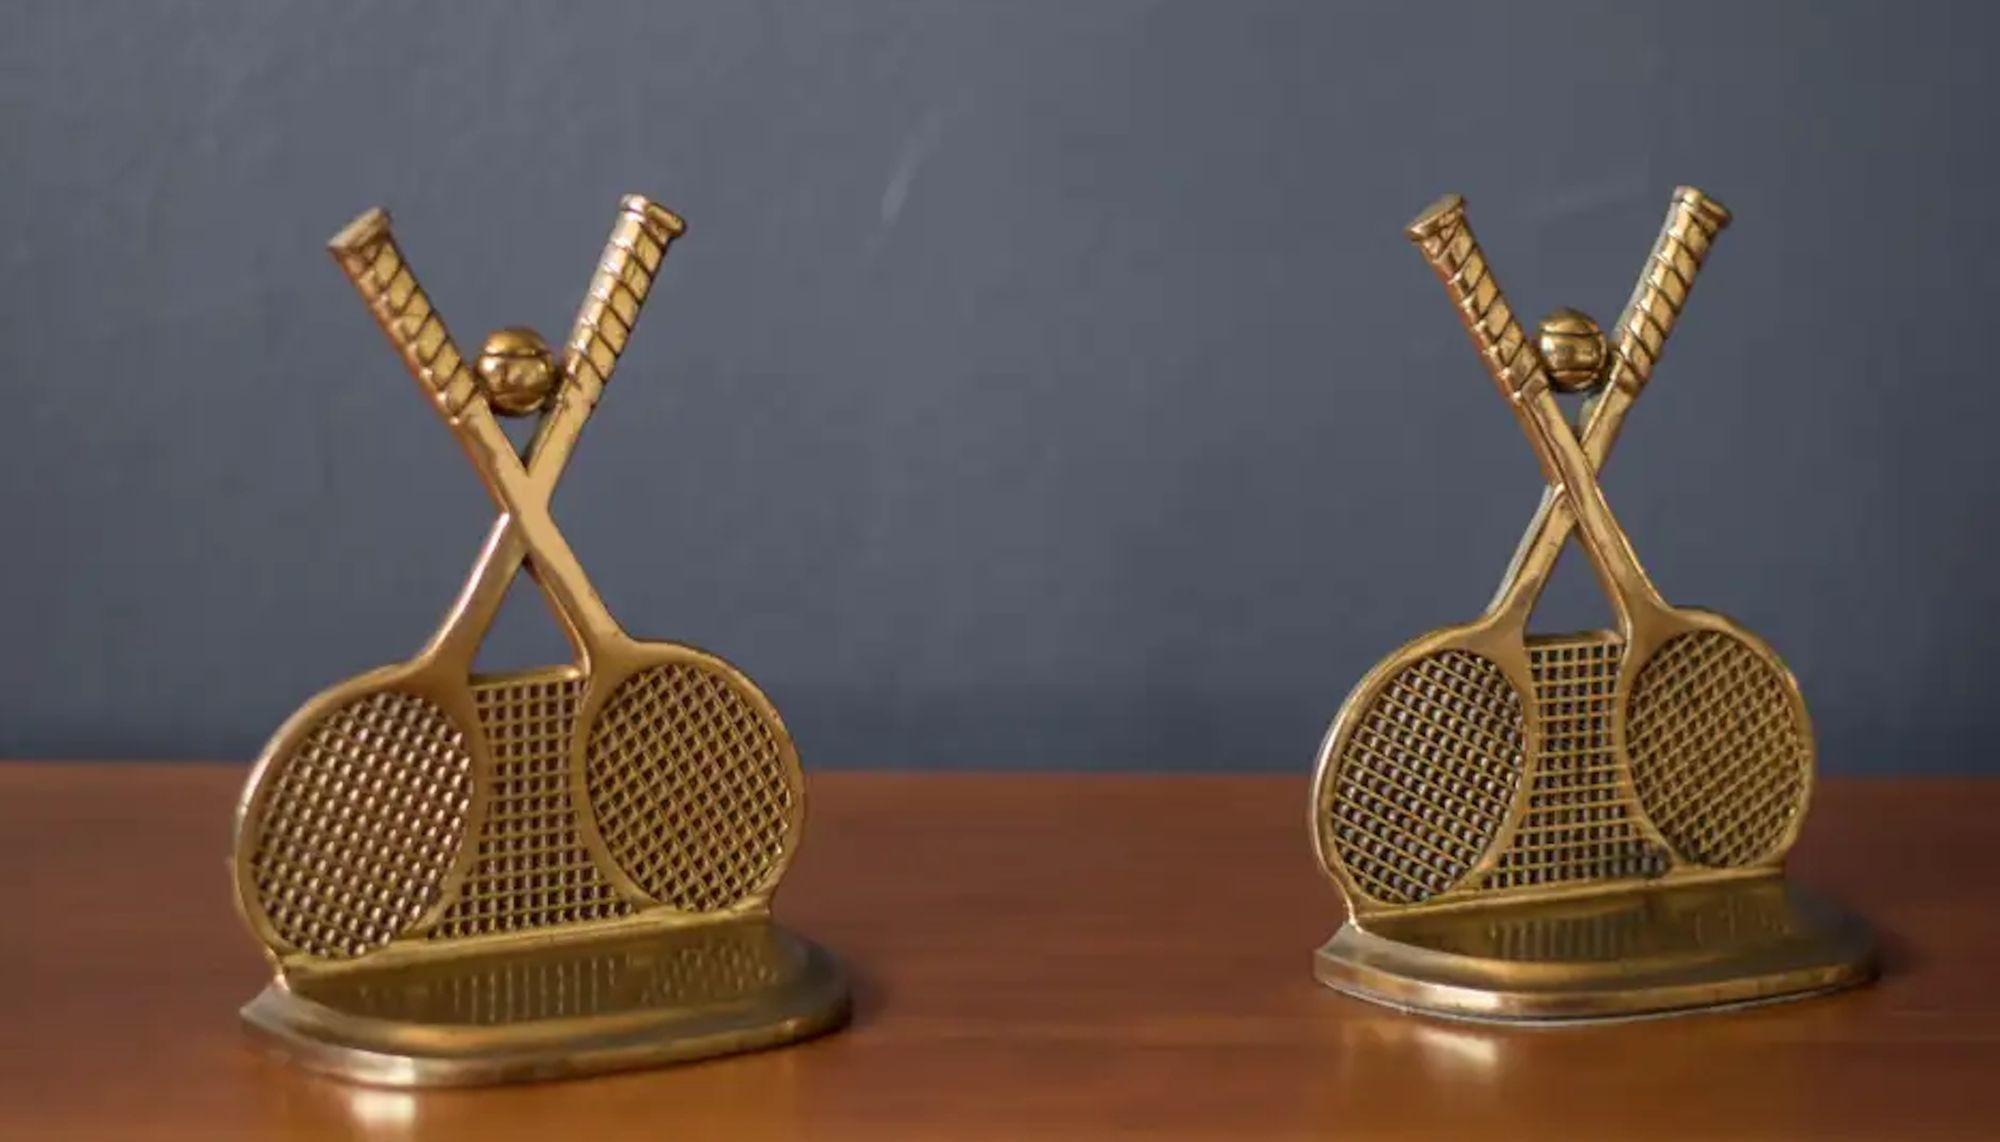 Mid-Century Modern Pair of Vintage Brass Tennis Racket and Ball Bookends